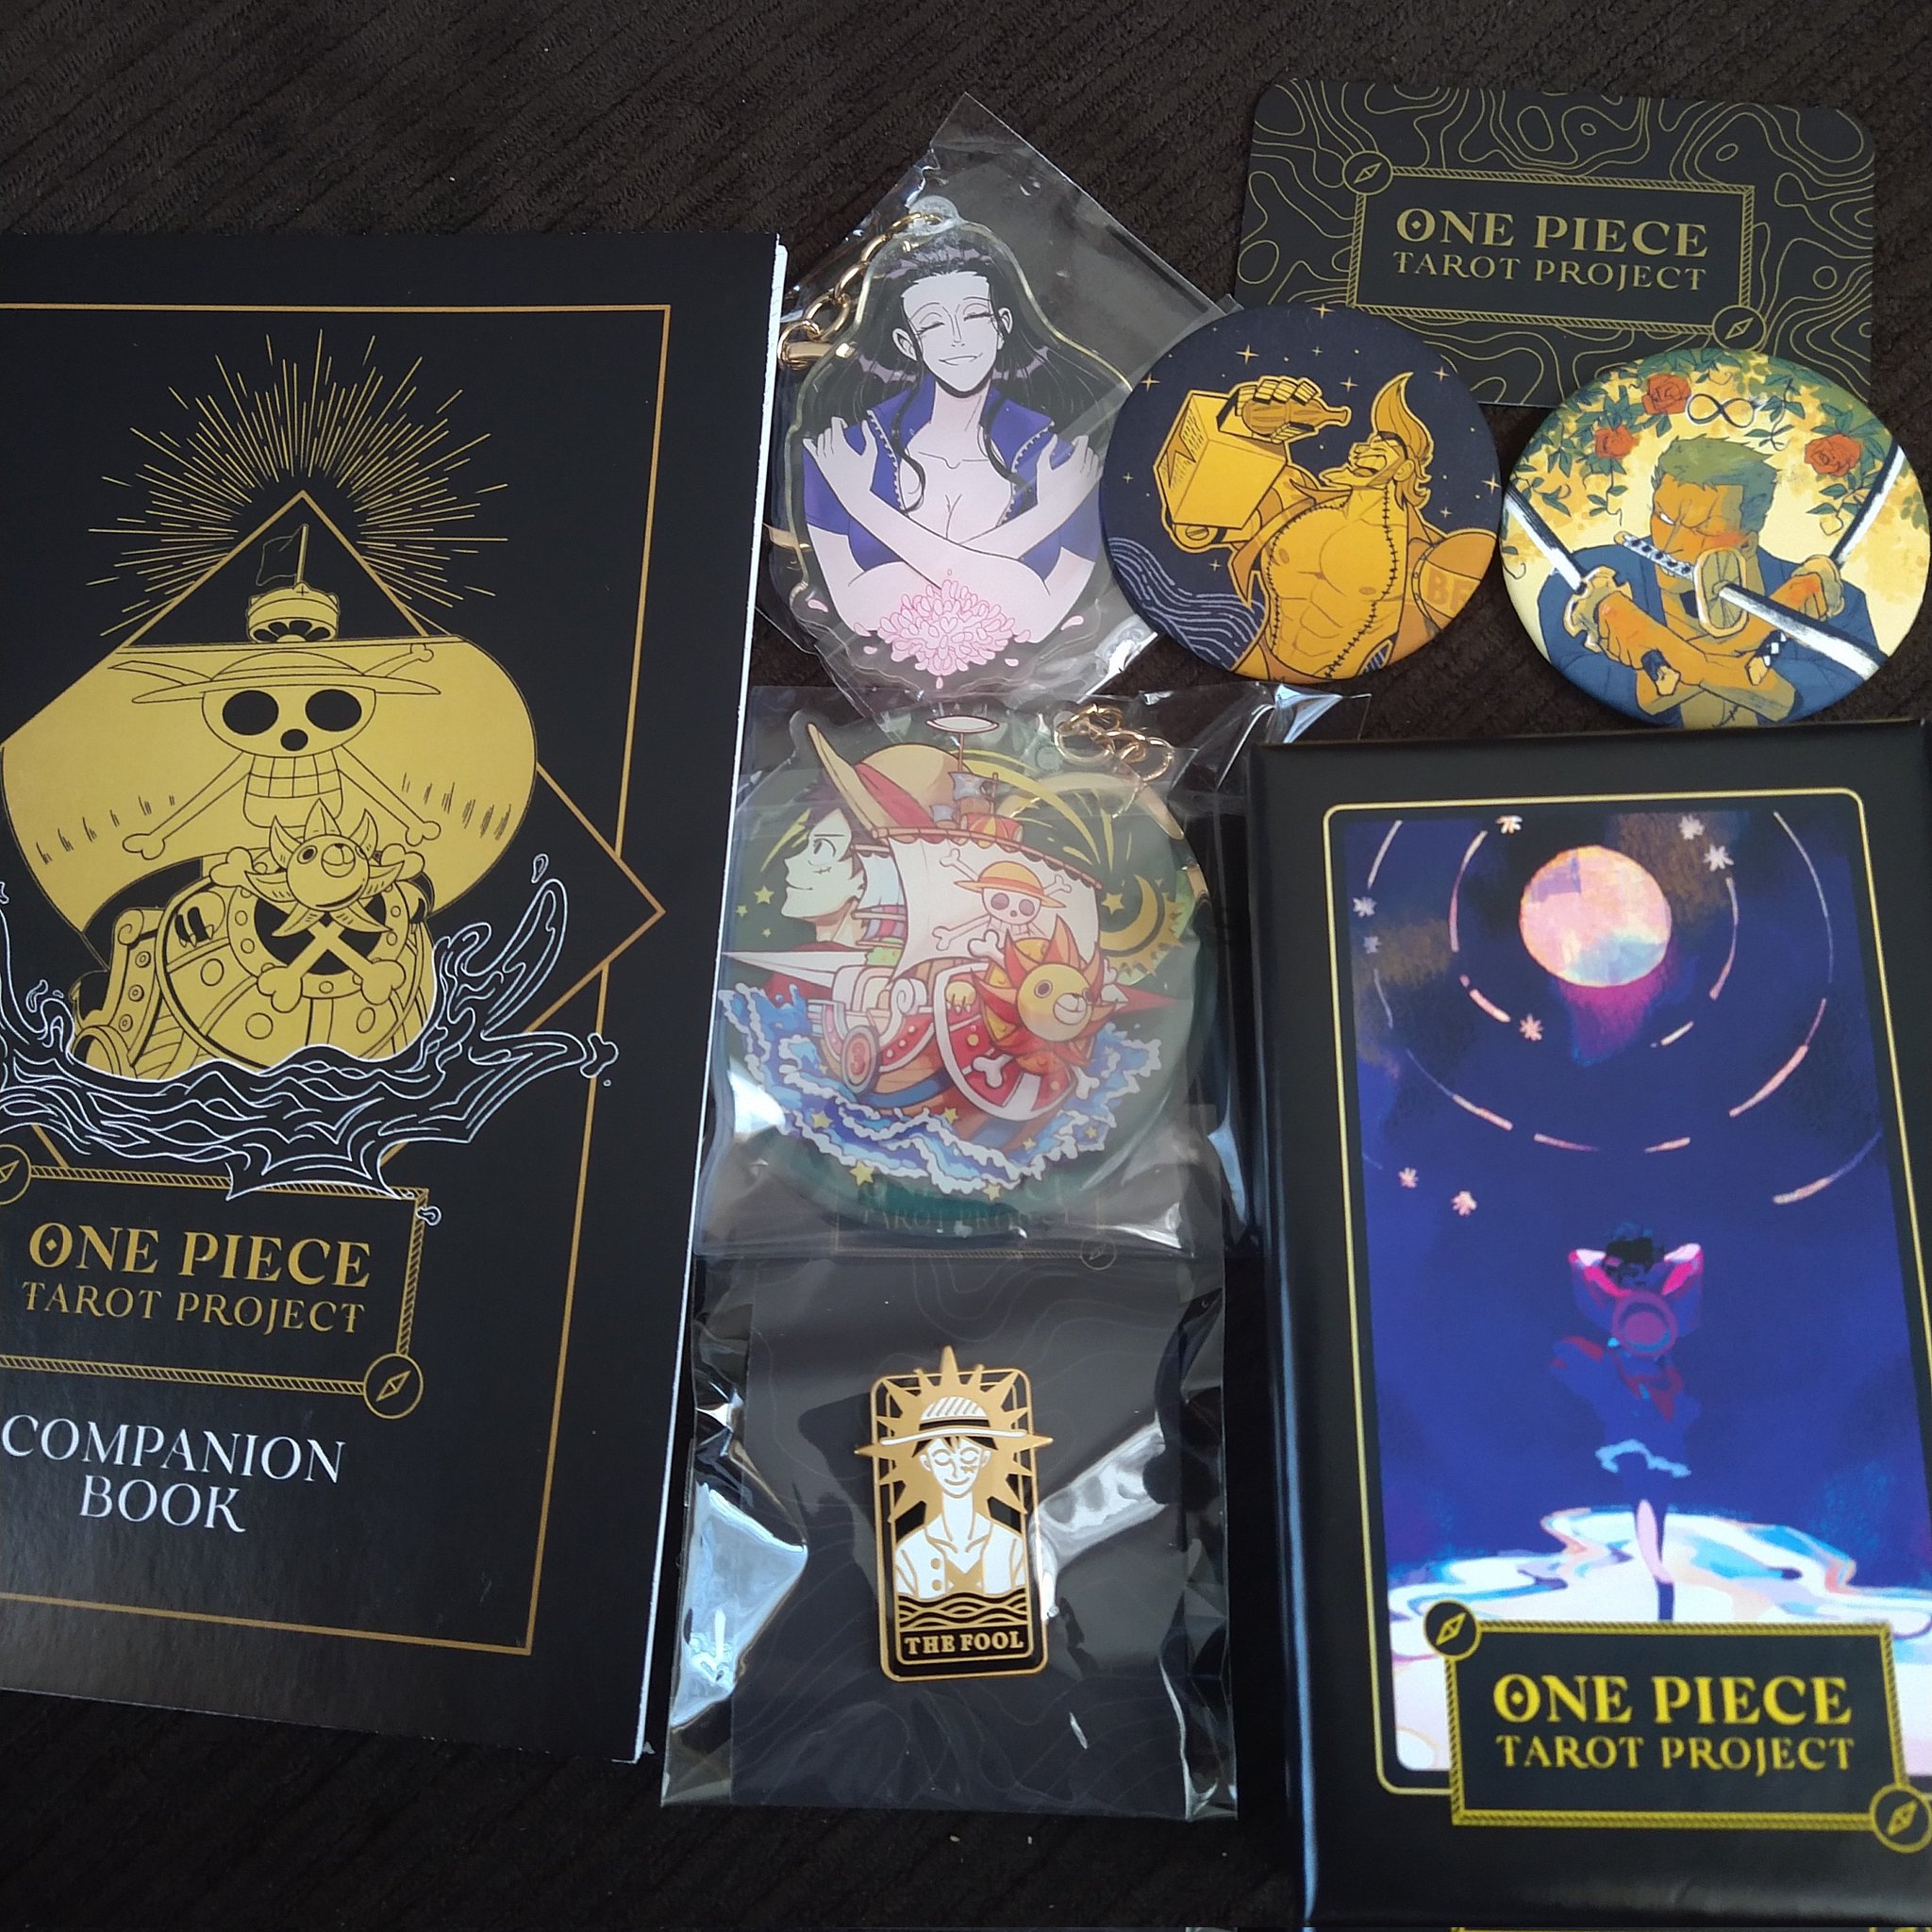 One Piece Tarot Project came in the mail today : r/OnePiece